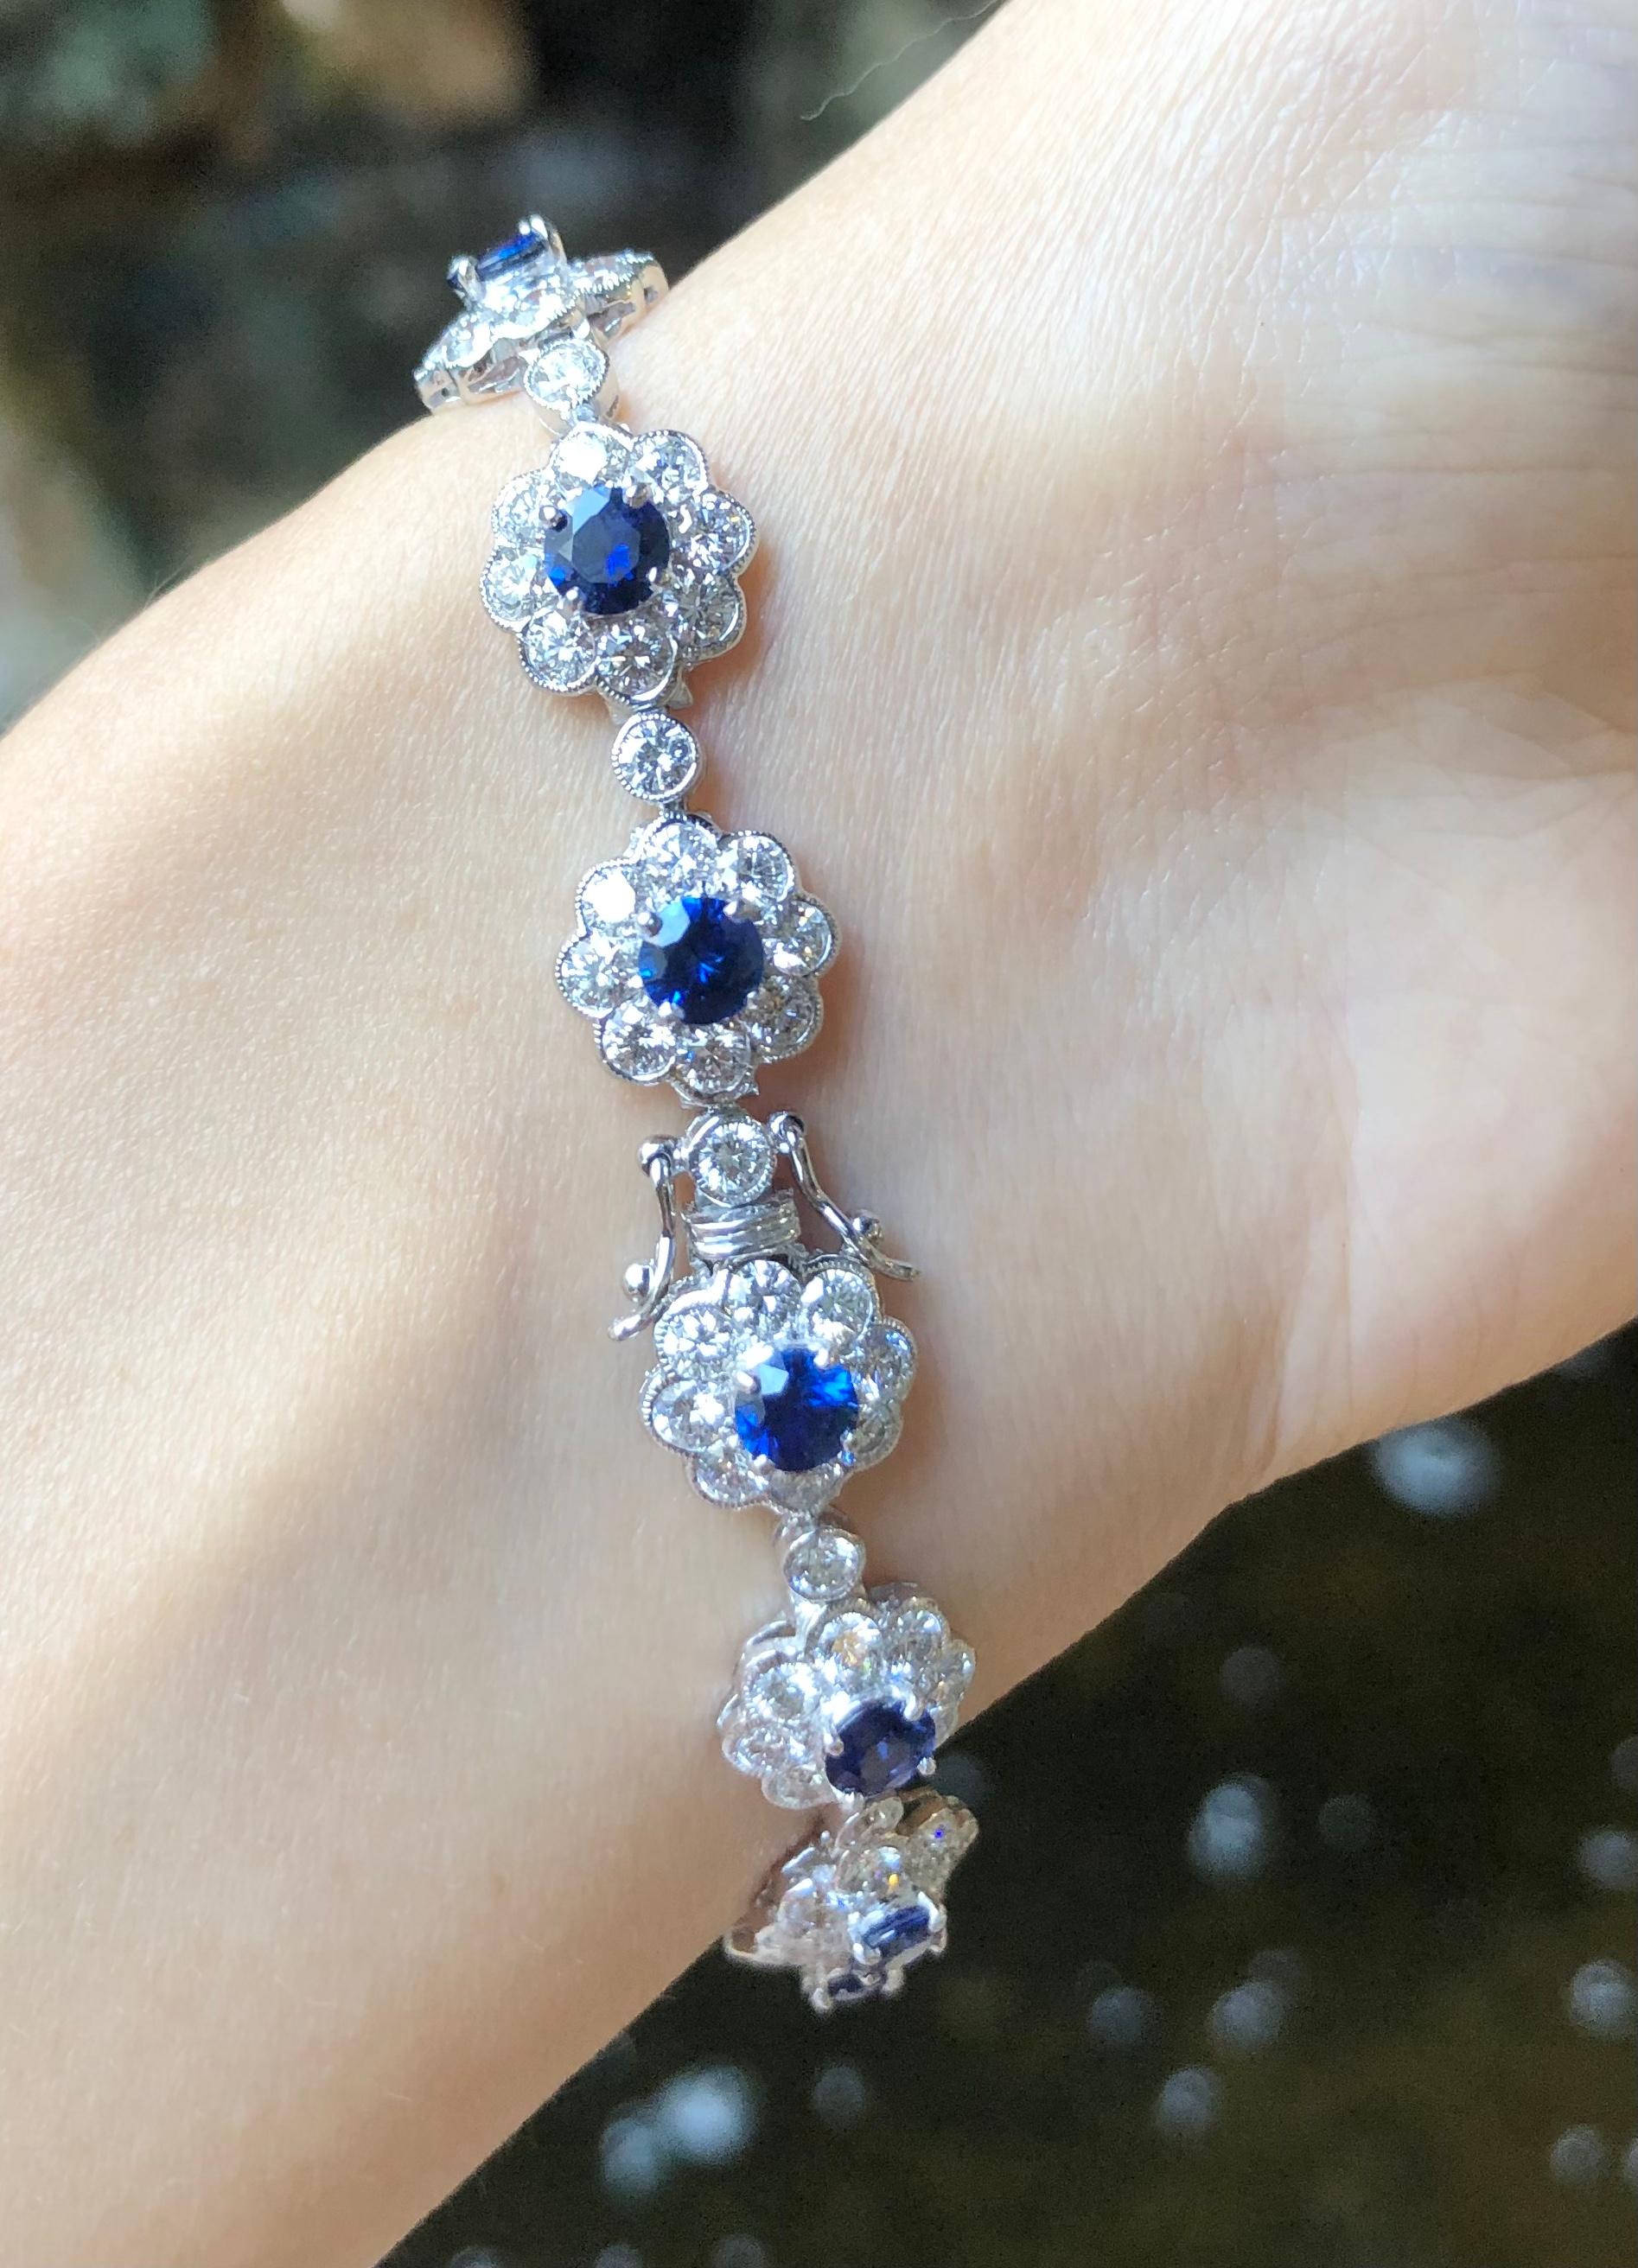 Blue Sapphire 3.96 carats with Diamond 5.77 carats Bracelet set in 18 Karat White Gold Settings

Width:   1.0 cm 
Length:  16.70 cm
Total Weight: 11.84 grams

